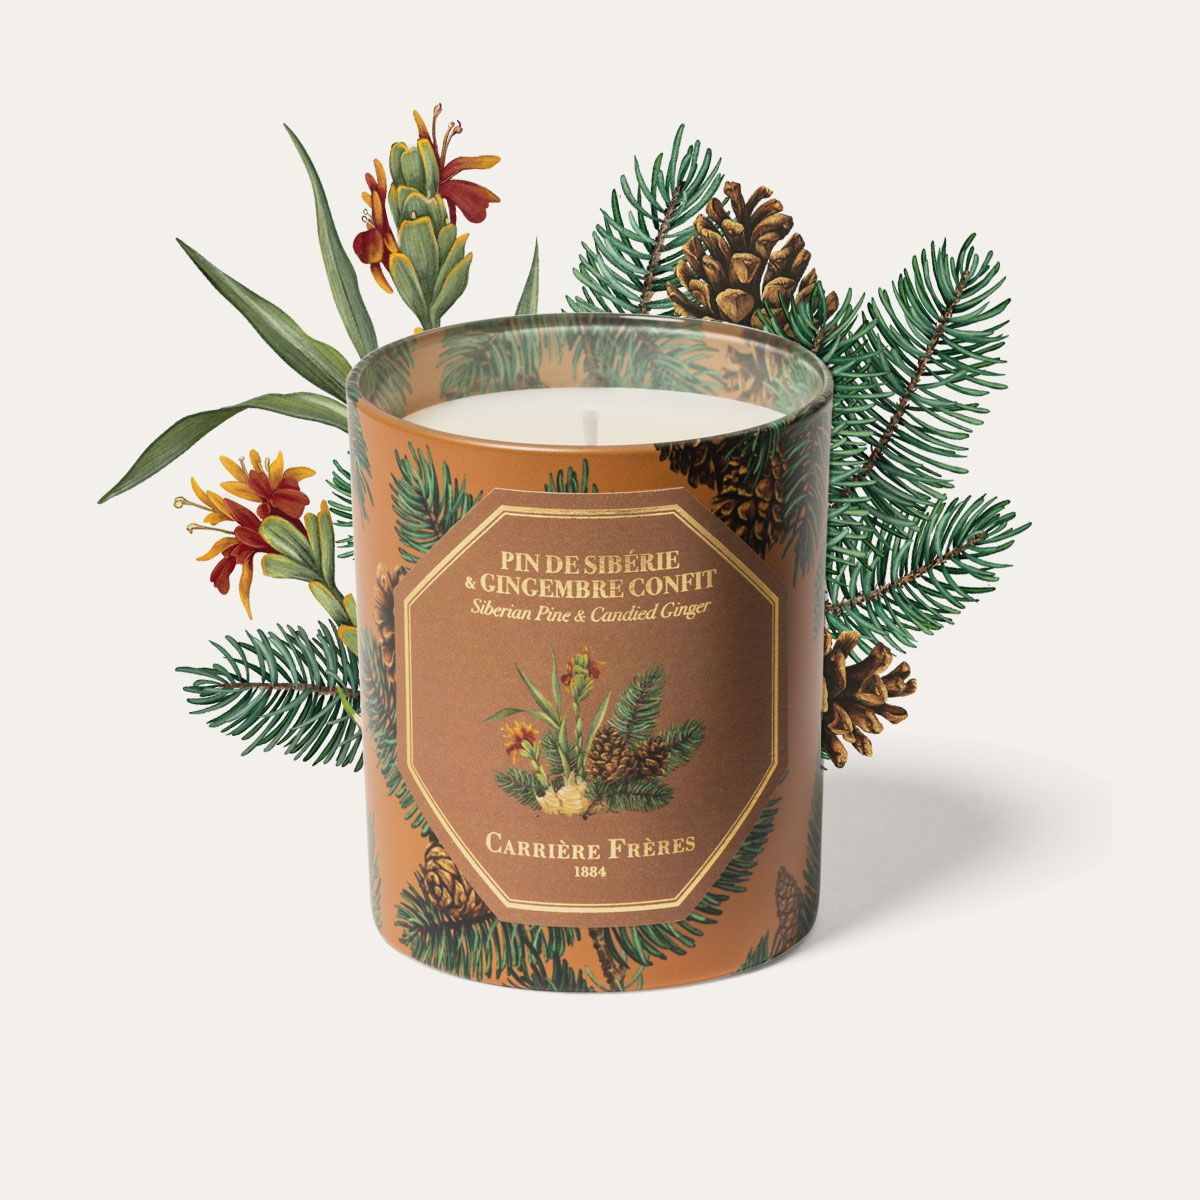 Carrière Frères Christmas Edition Siberian Pine & Candied Ginger Scented Candle｜西伯利亞松柏與蜜餞薑